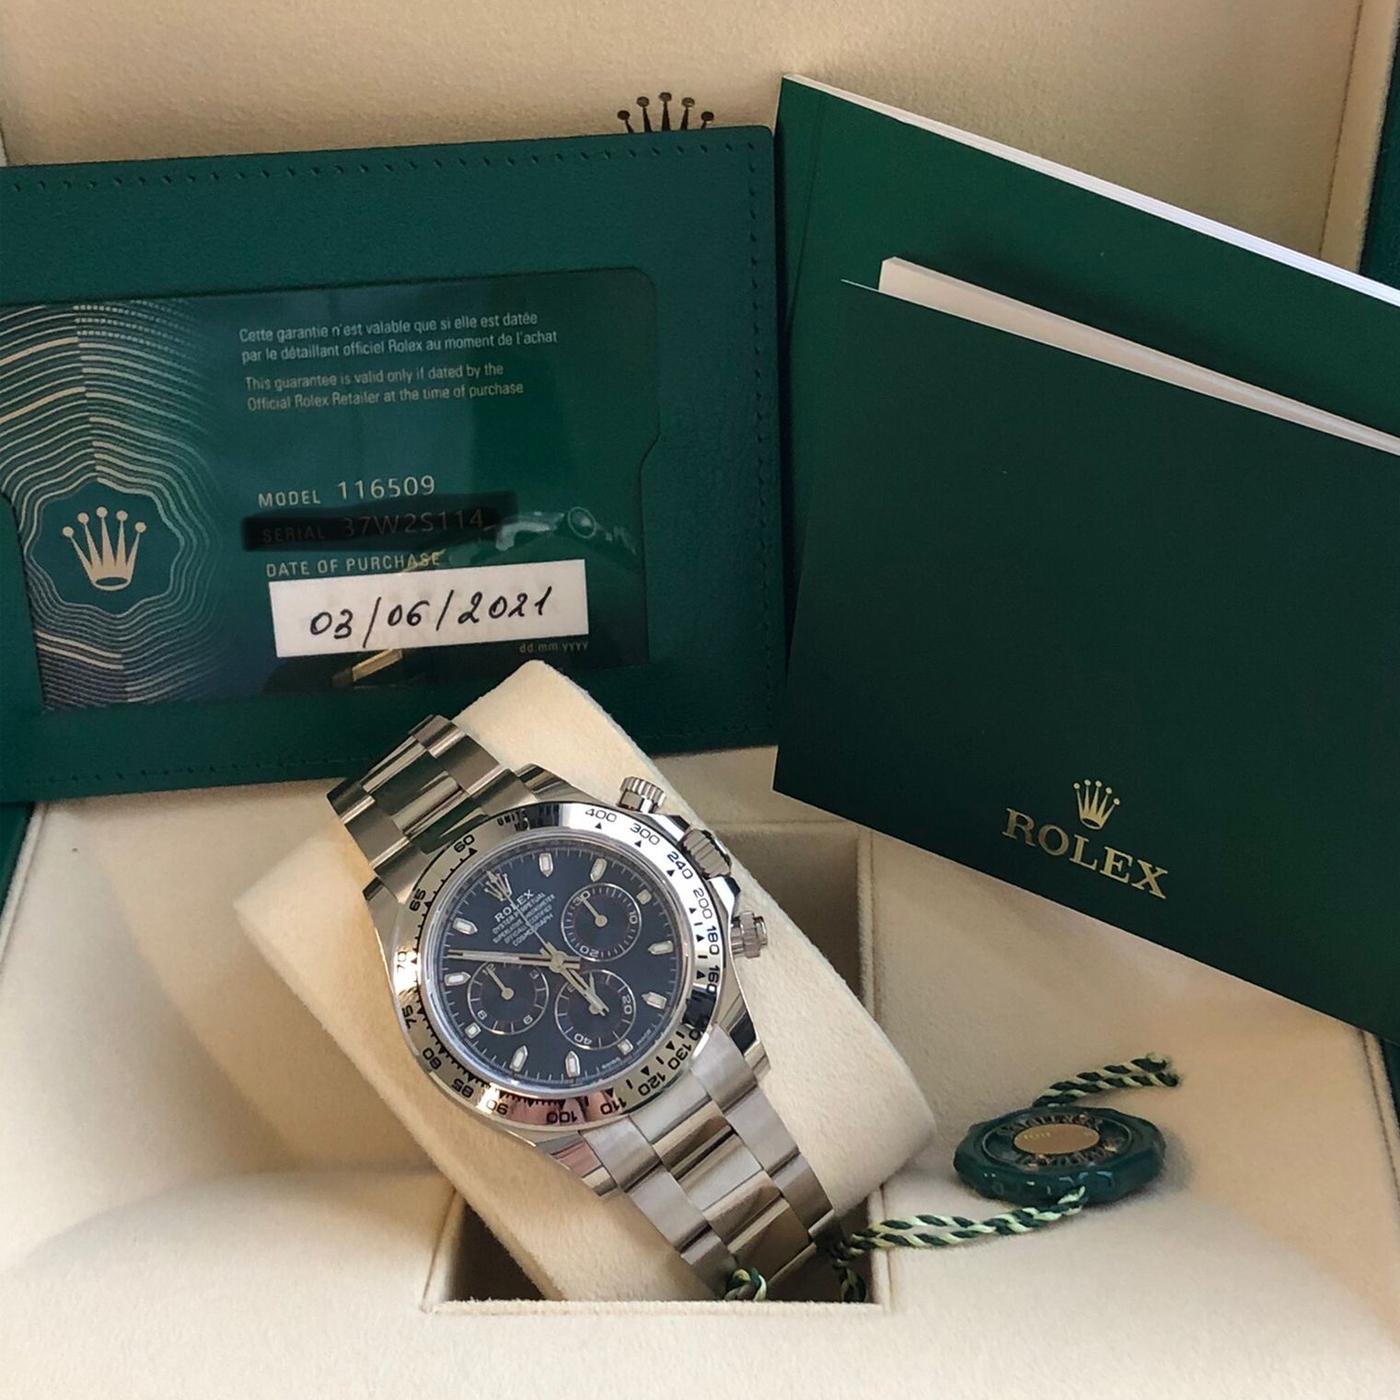 Rolex Daytona Oyster Perpetual Cosmograph 18k White Gold Blue Dial 116509 3